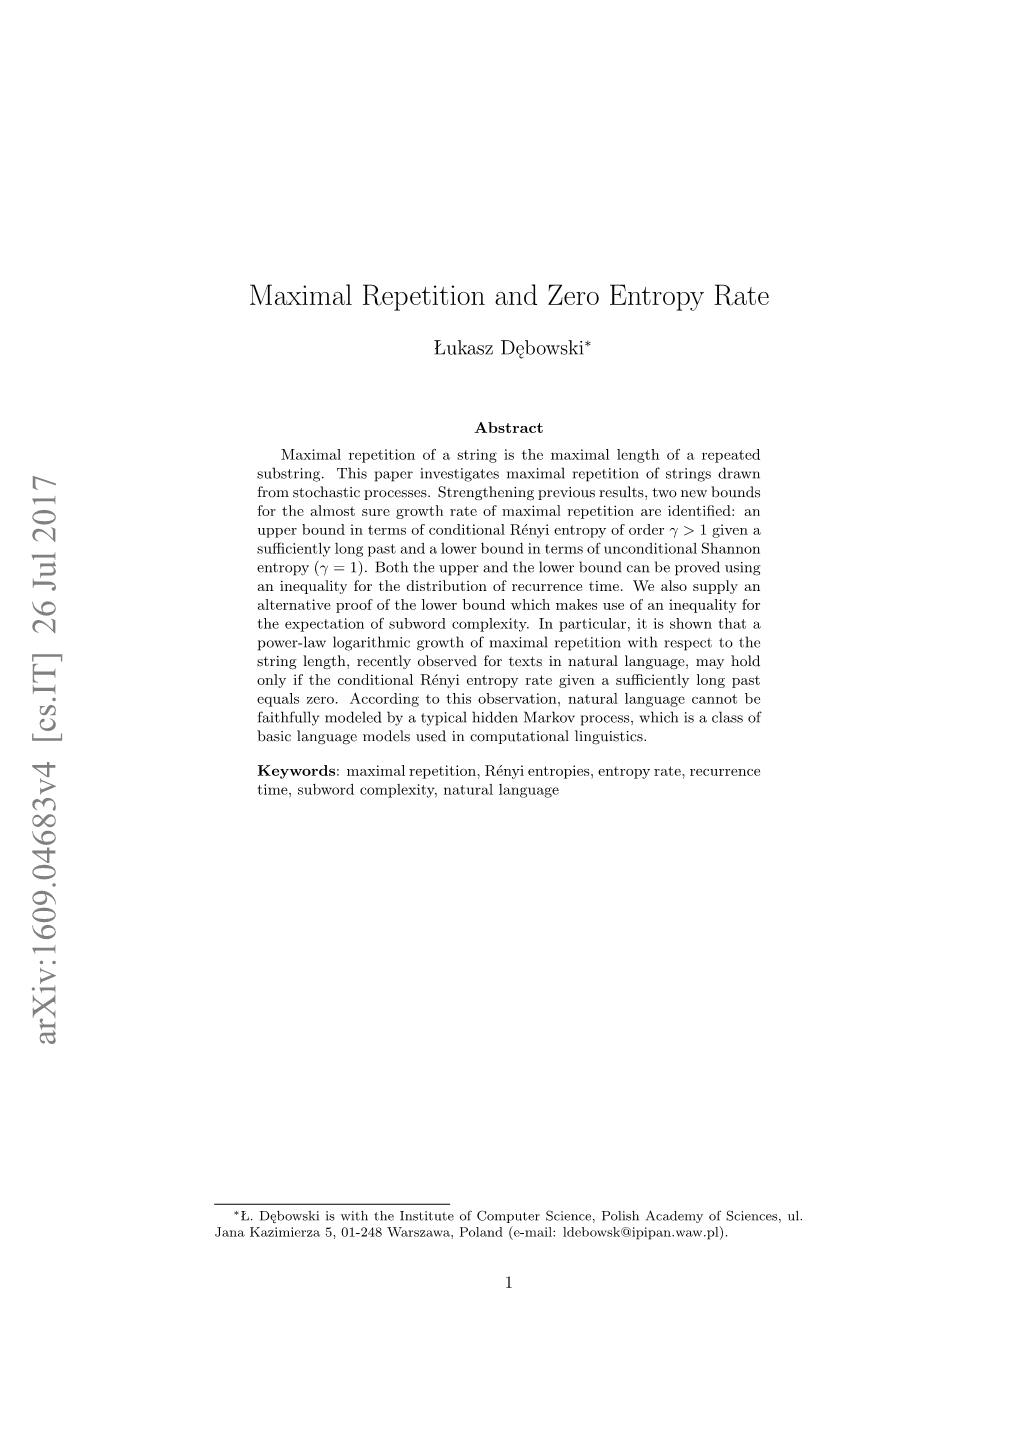 Maximal Repetition and Zero Entropy Rate